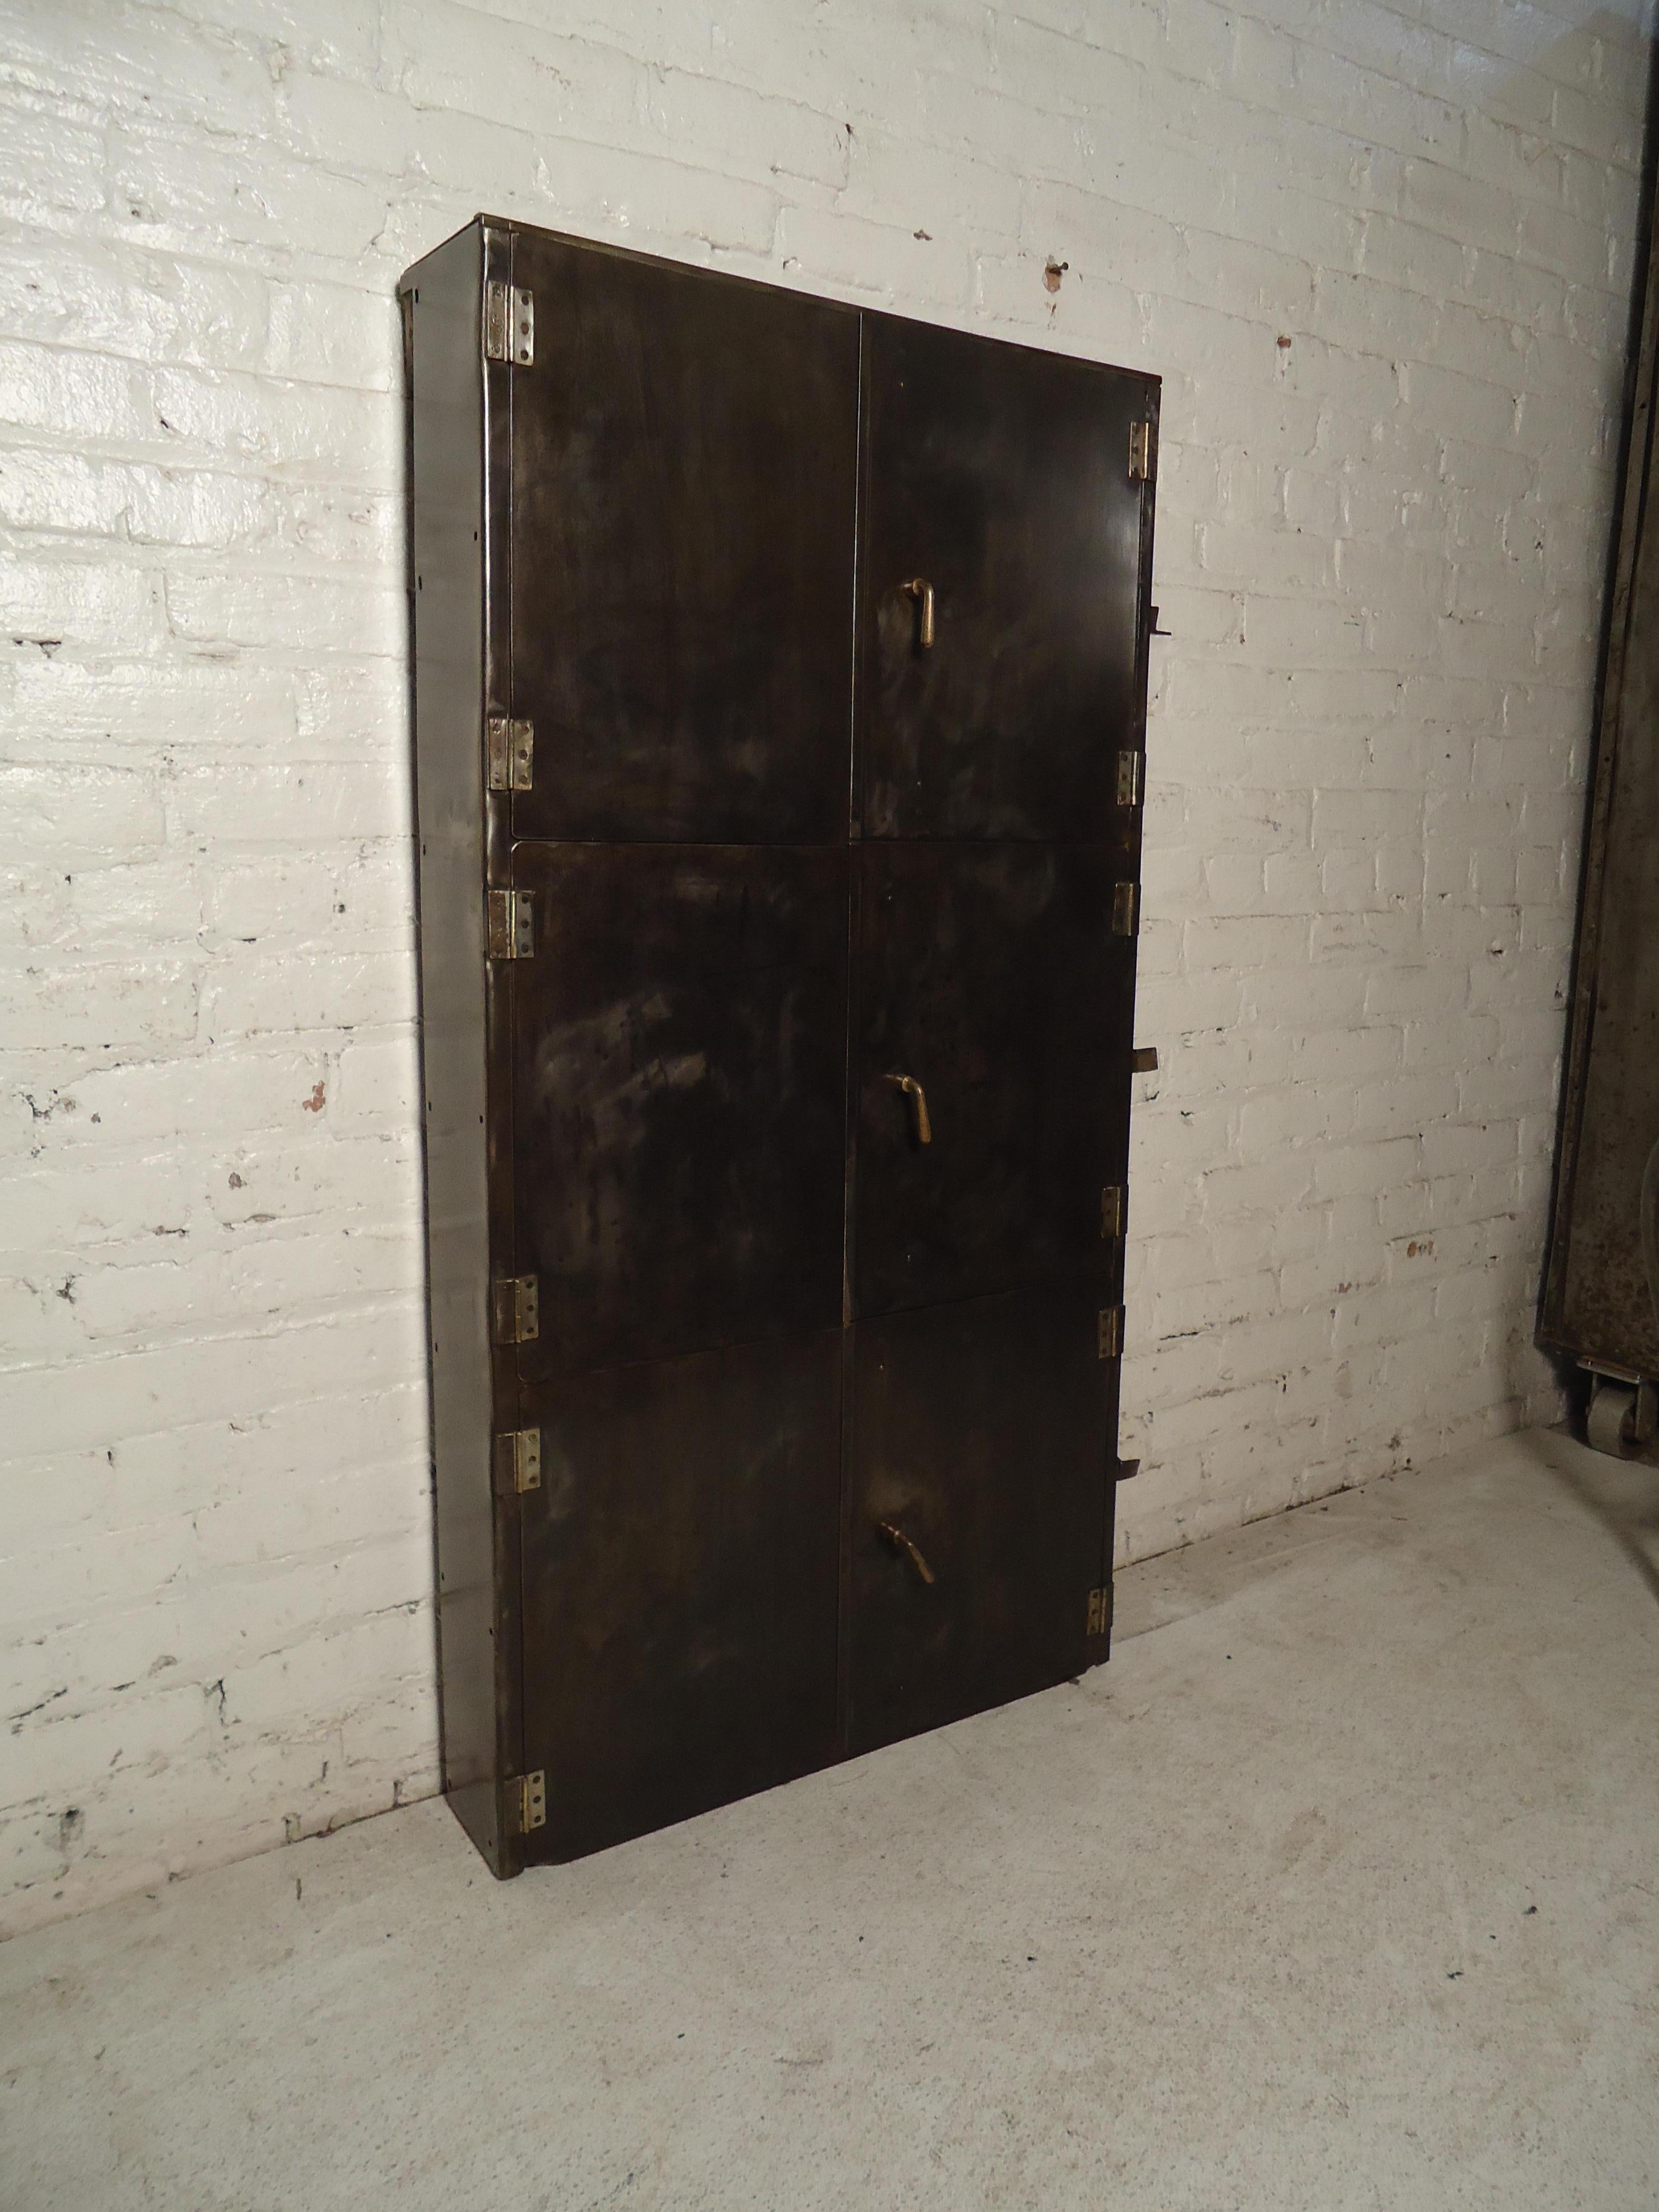 Vintage modern industrial metal wall-mounted cabinet features three shelves, and metal knobs.
(Please confirm item location - NY or NJ - with dealer).